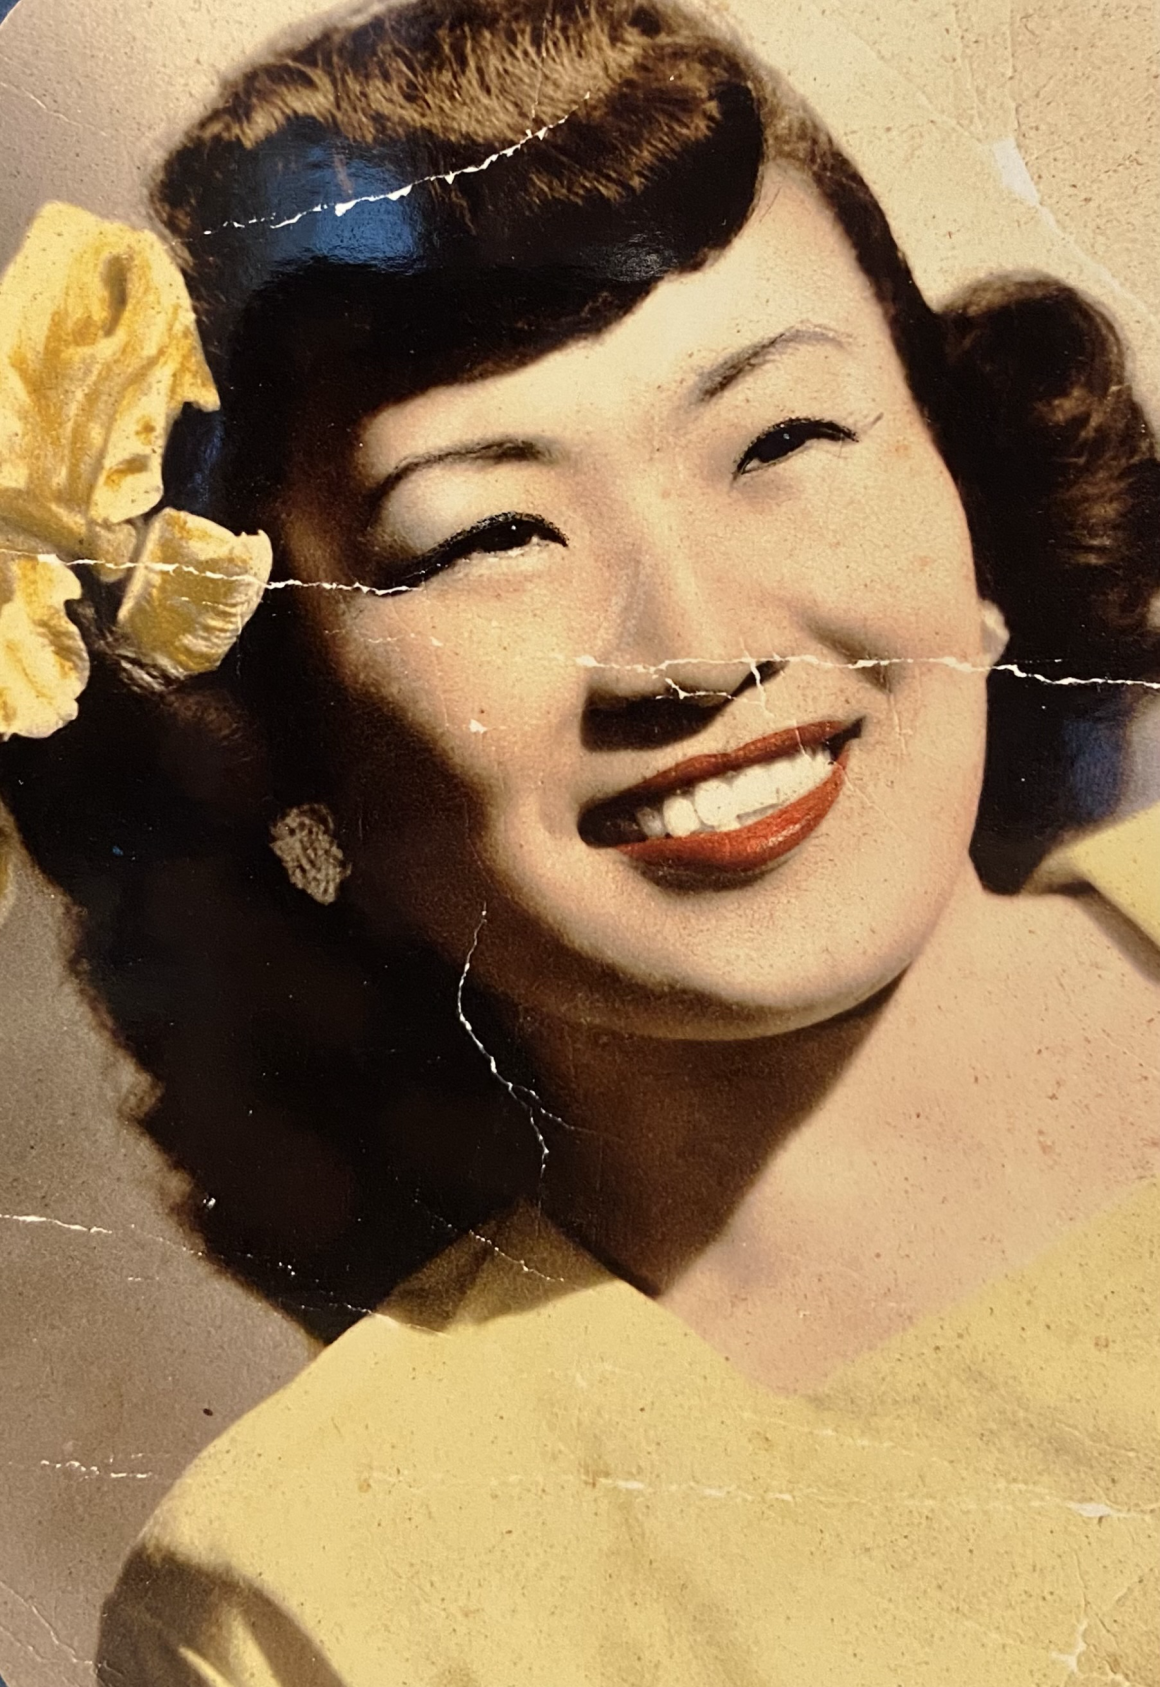 Olivia Spaccasi's grandmother when she was still living in Hawaii. She is Korean and has a yellow flower in her hair.